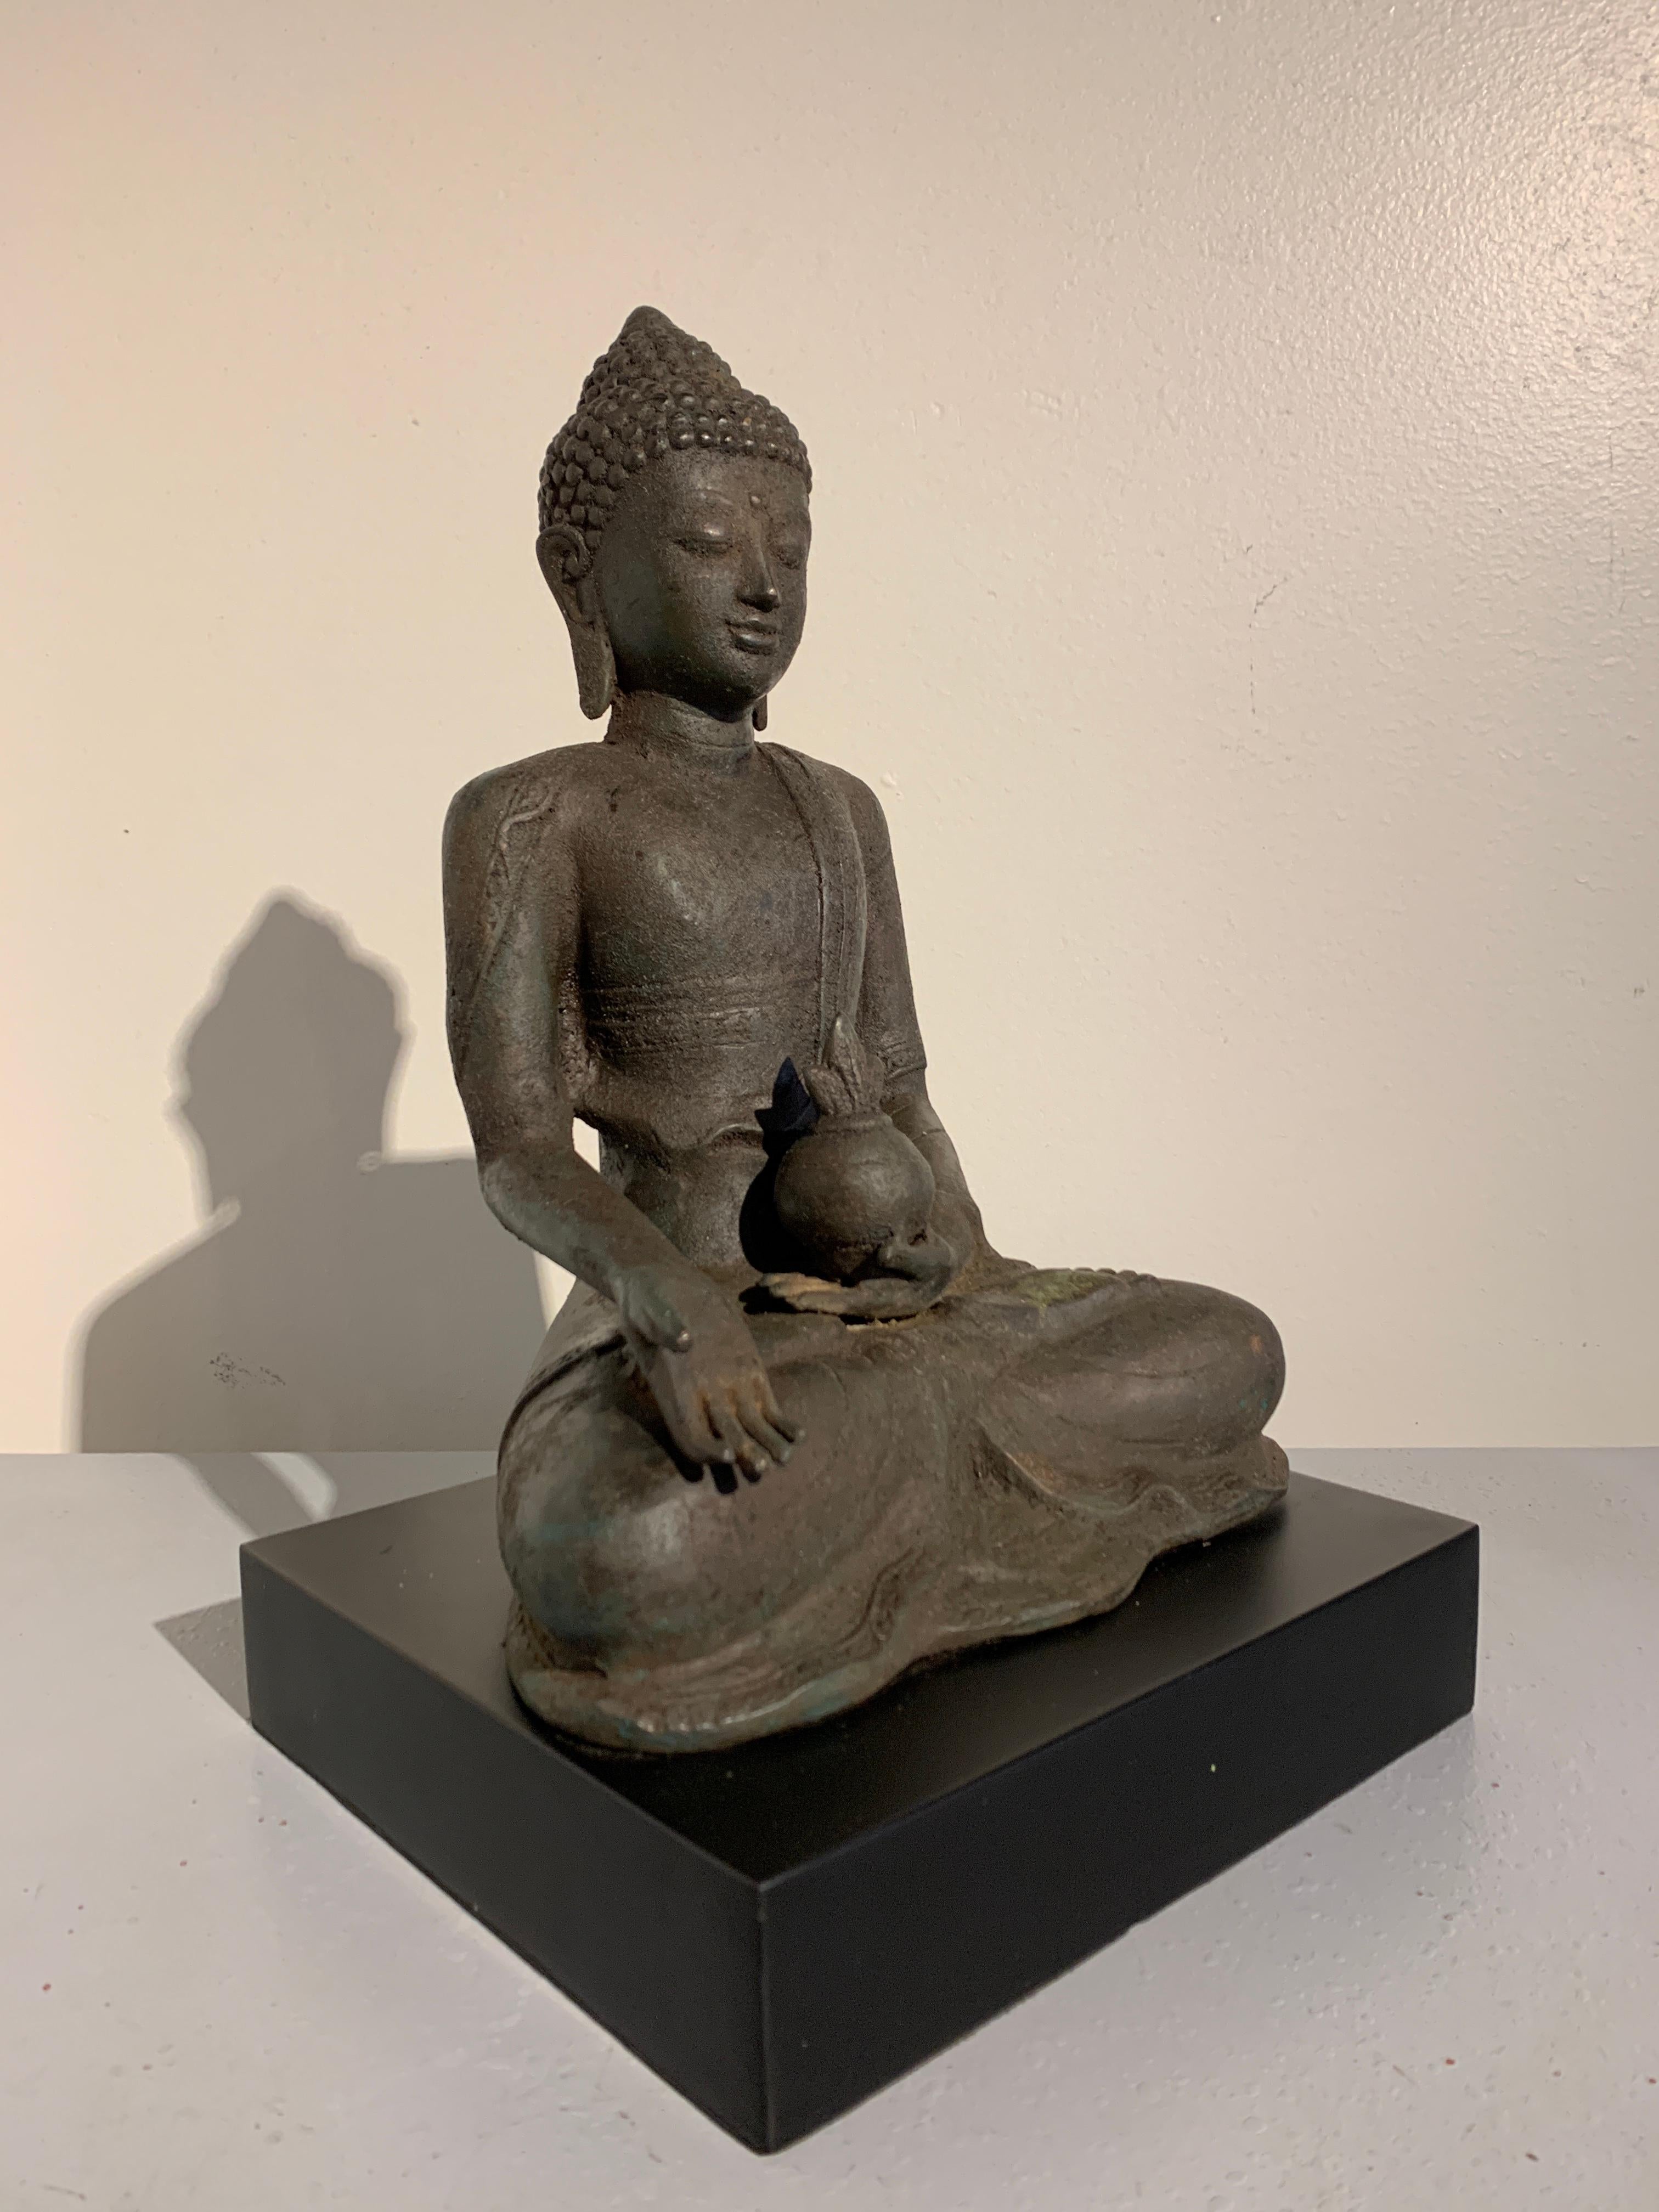 A beautiful and serene vintage cast metal statue of the Medicine Buddha, Bhaisajyaguru, Bali, Indonesia, 1970s.

The Medicine Buddha is simply cast, without excessive details. The Buddha wears a loose robe, with one shoulder and the chest exposed.